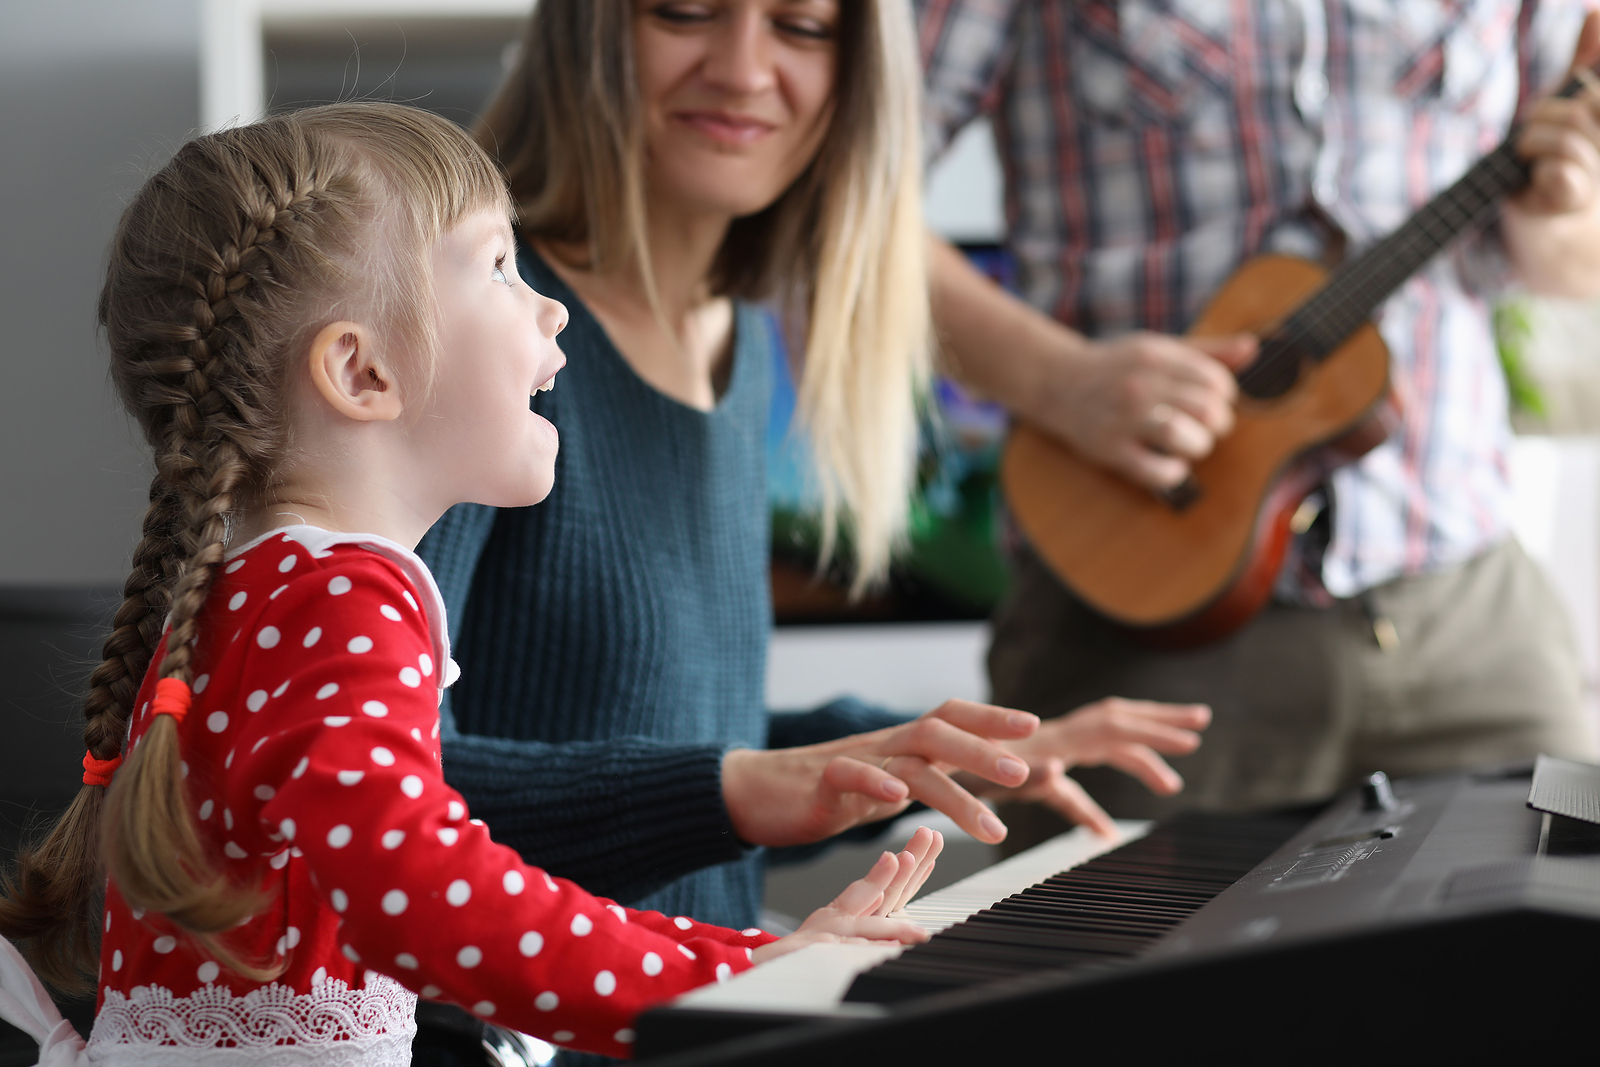 Little girl sings song is played on piano together with her parents portrait. Classes at music school for children concept.